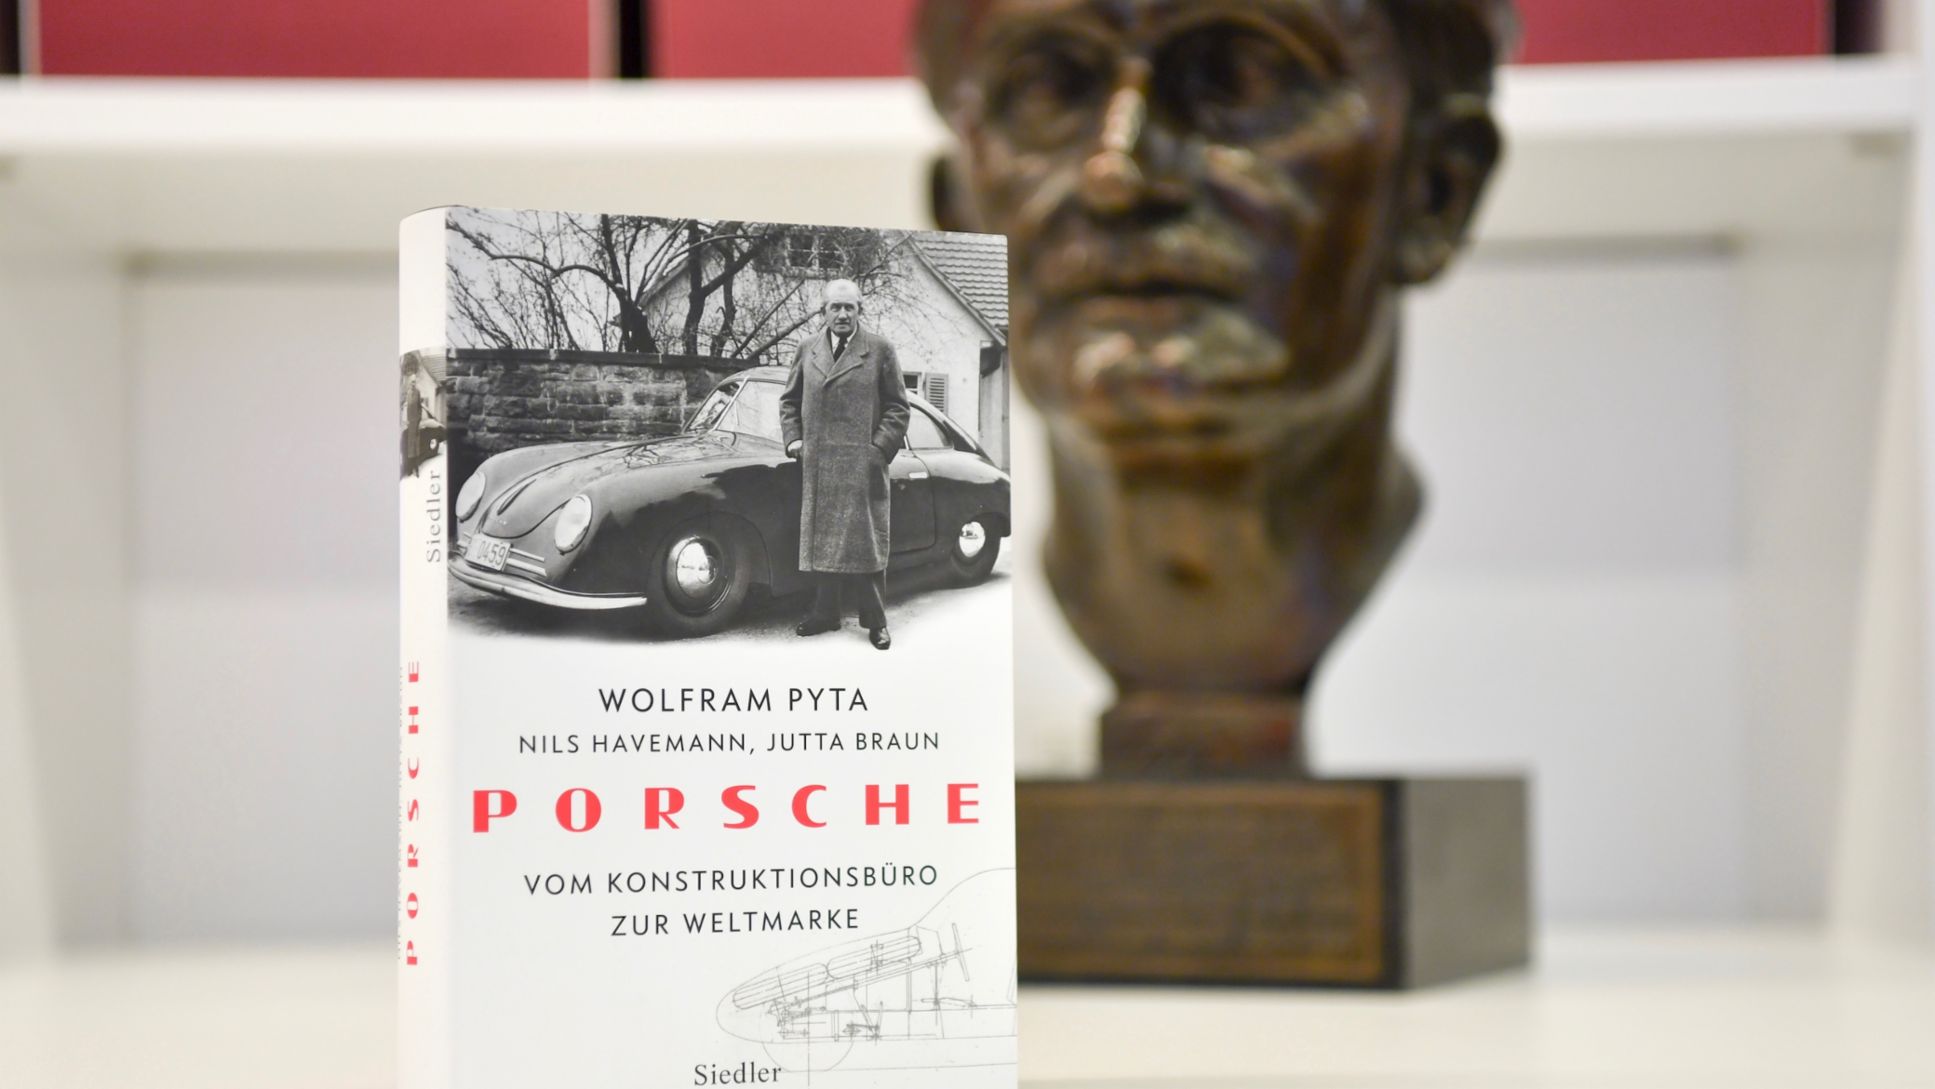 The history of the Porsche engineering office, 2017, Porsche AG